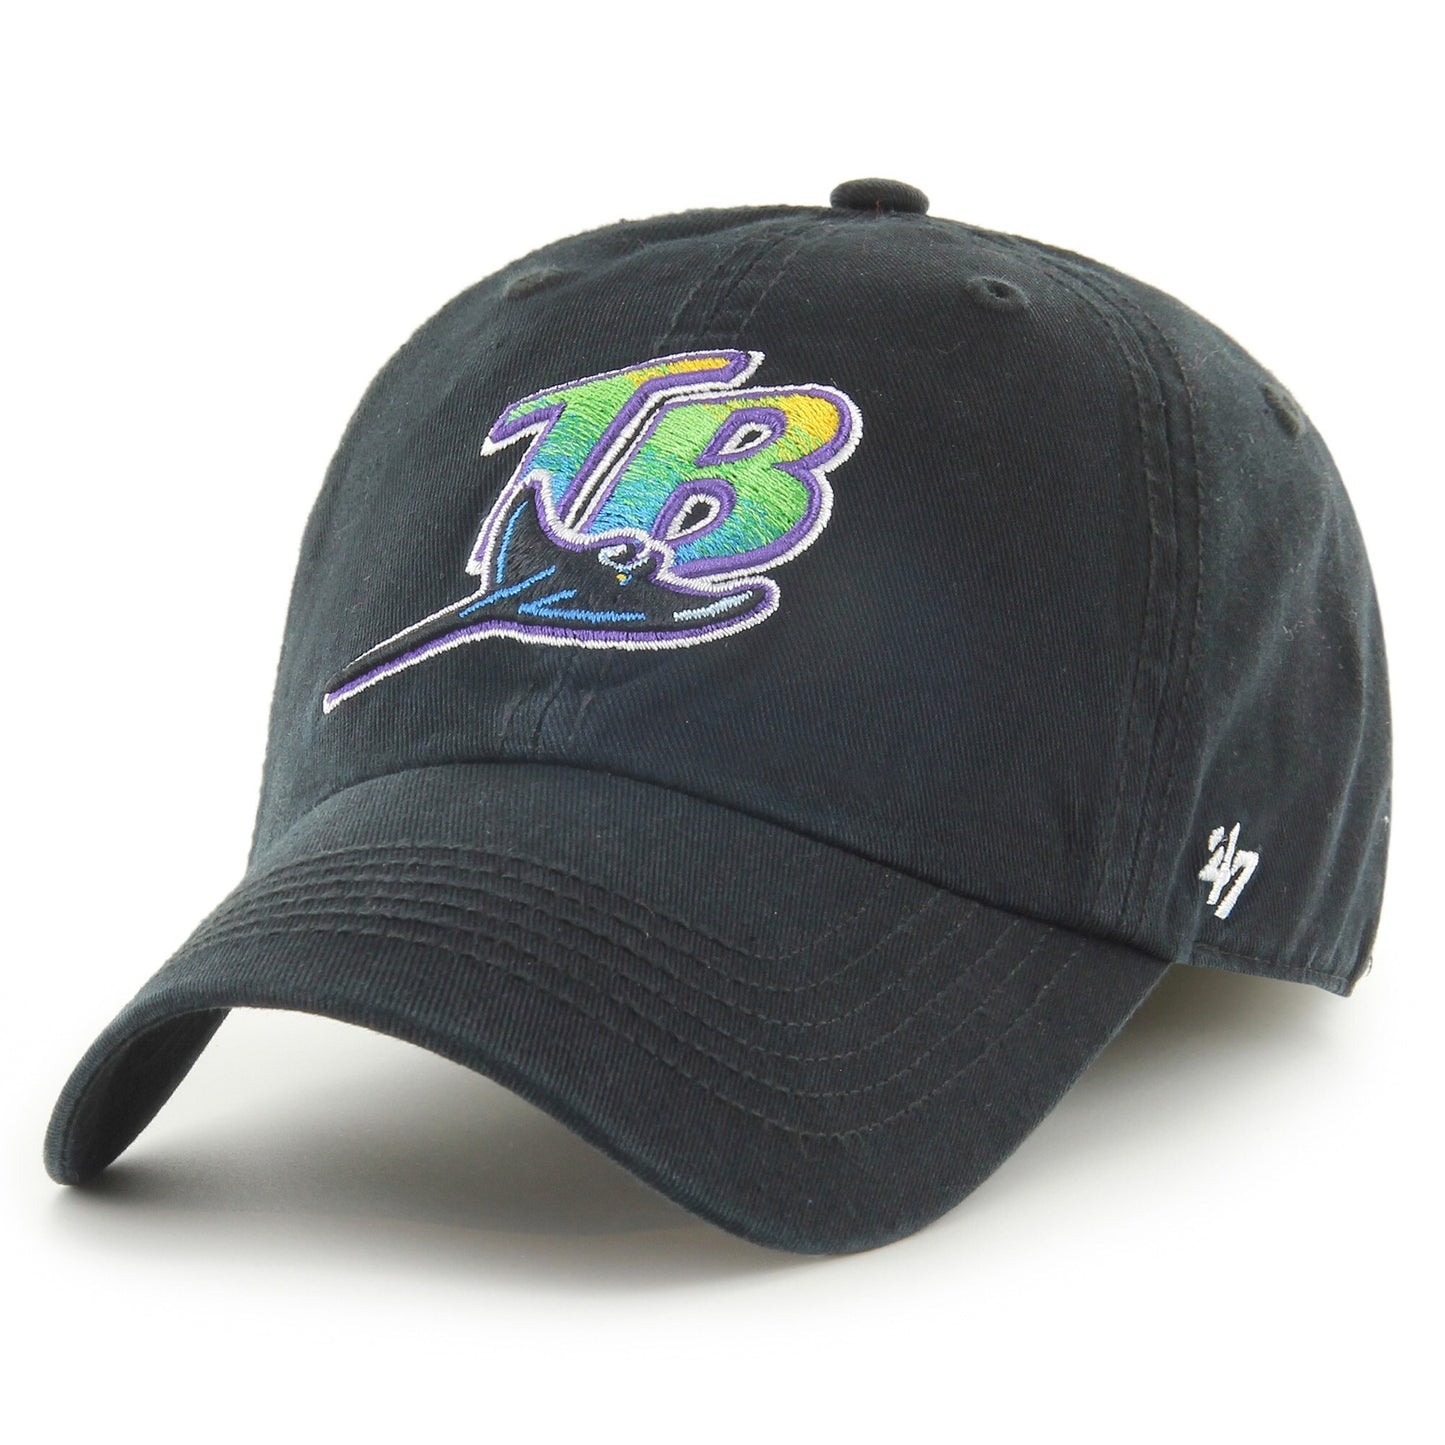 Tampa Bay Rays '47 Cooperstown Collection Franchise Fitted Hat - Black